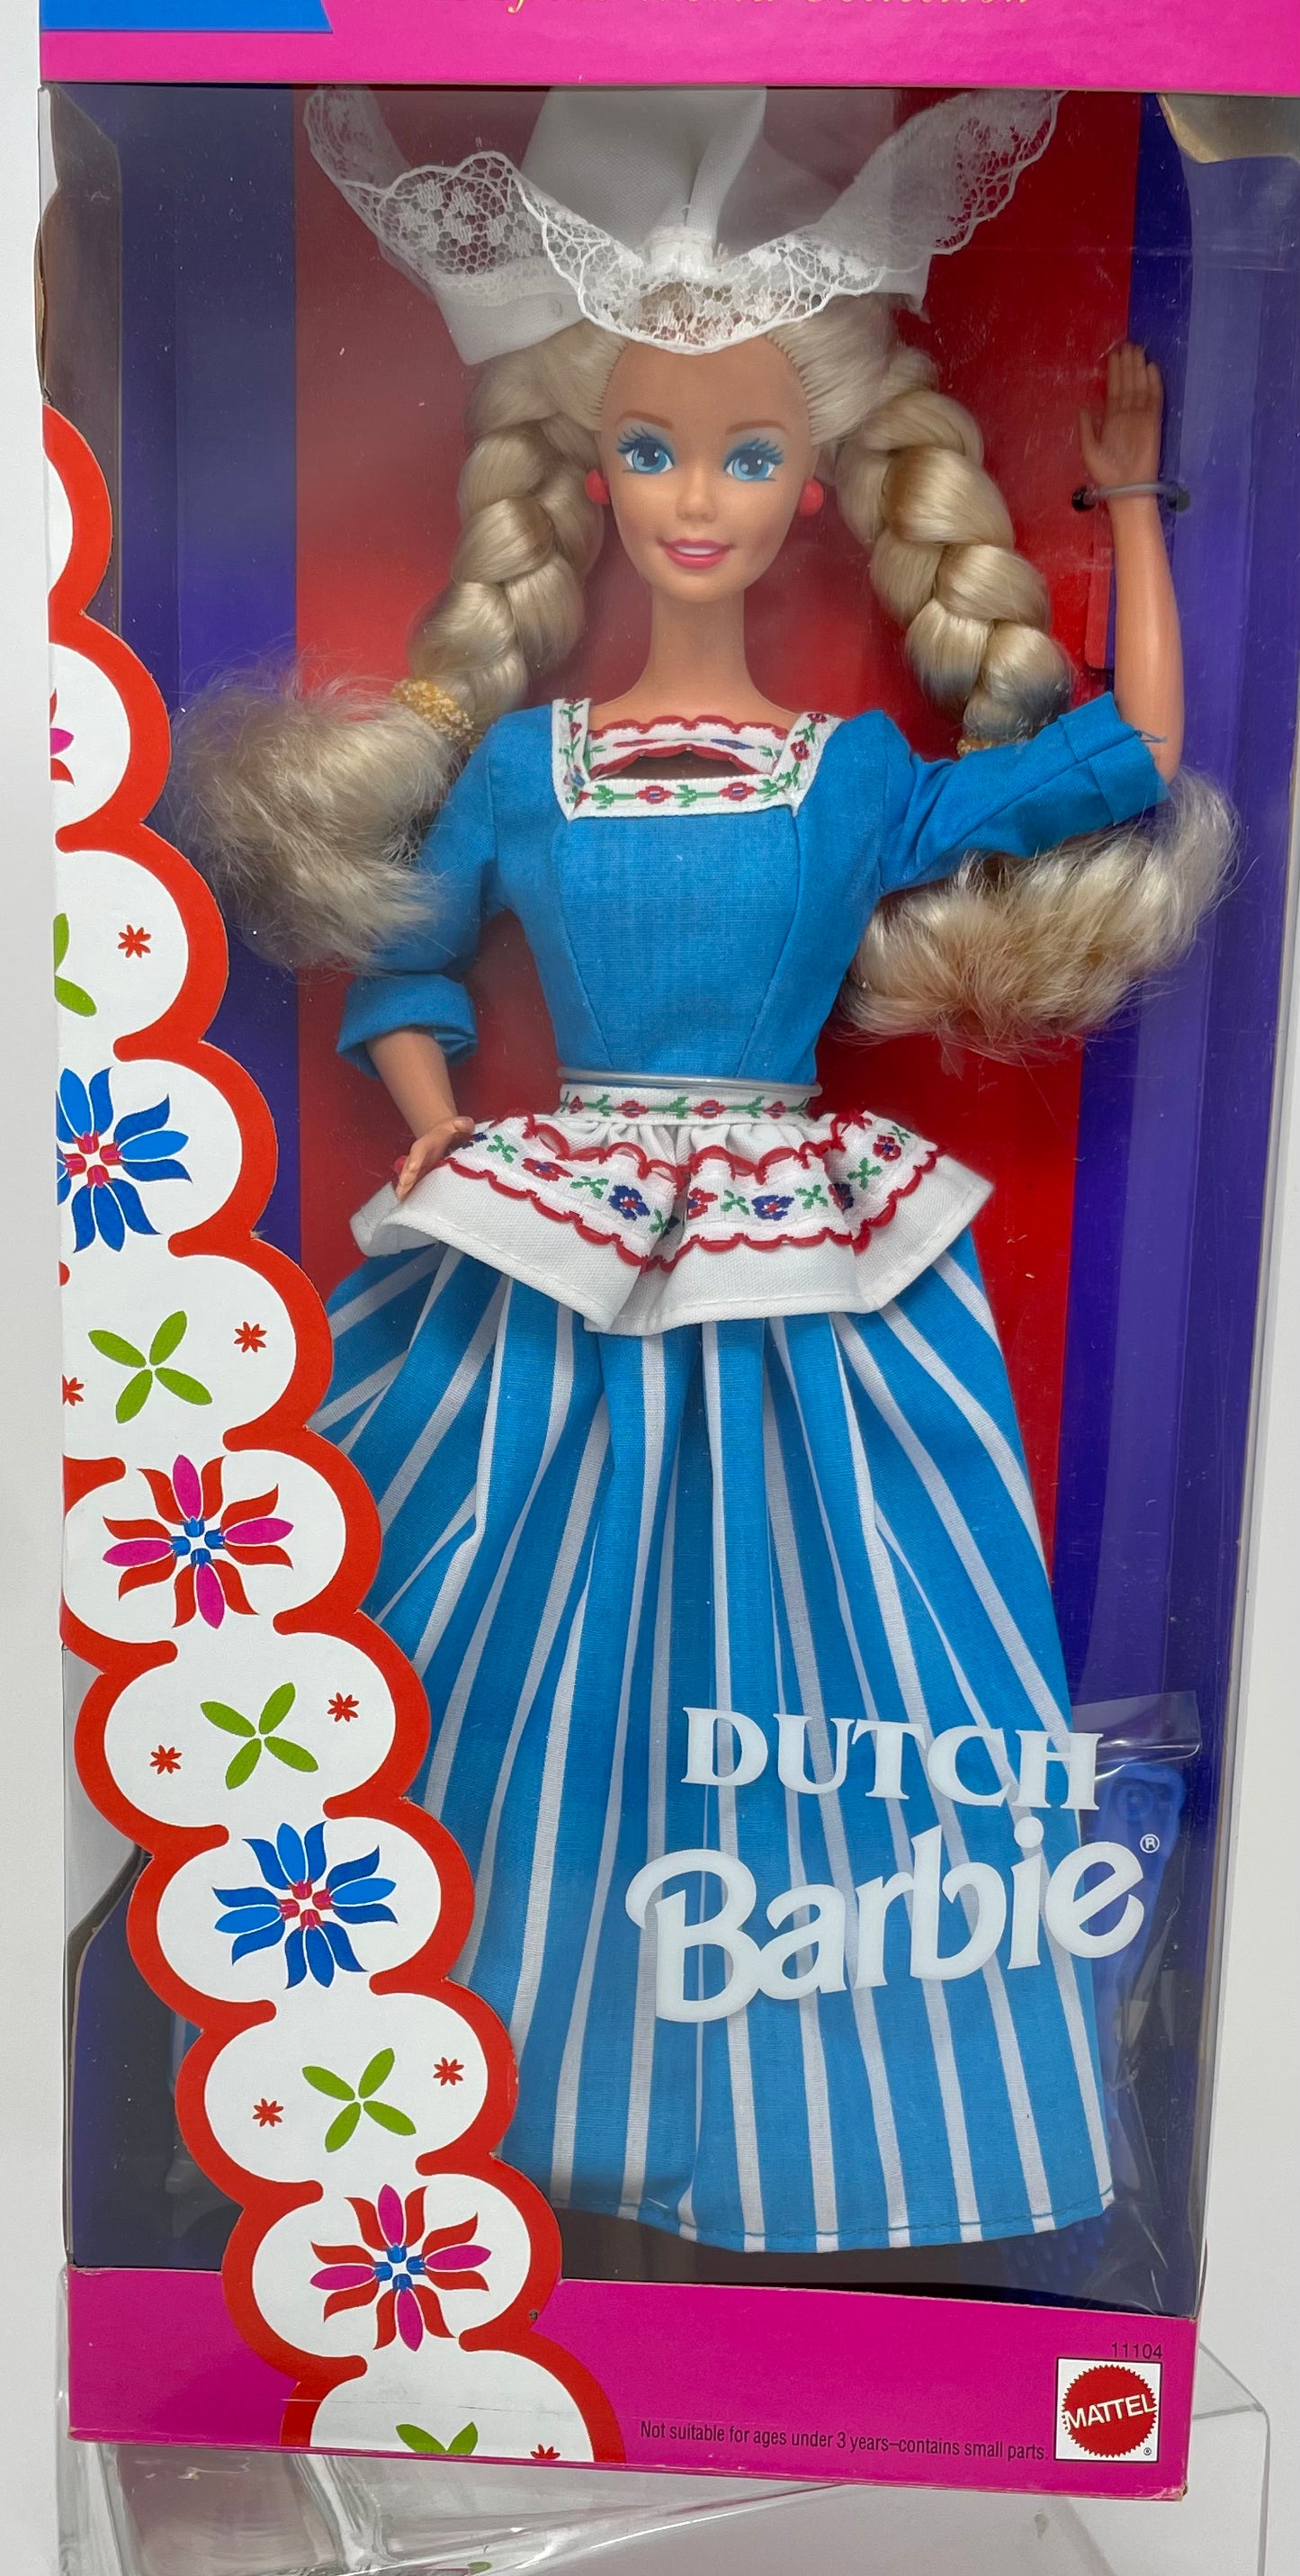 DUTCH BARBIE - DOLLS OF THE WORLD COLLECTION - SPECIAL EDITION - # 11104 - MATTEL 1993